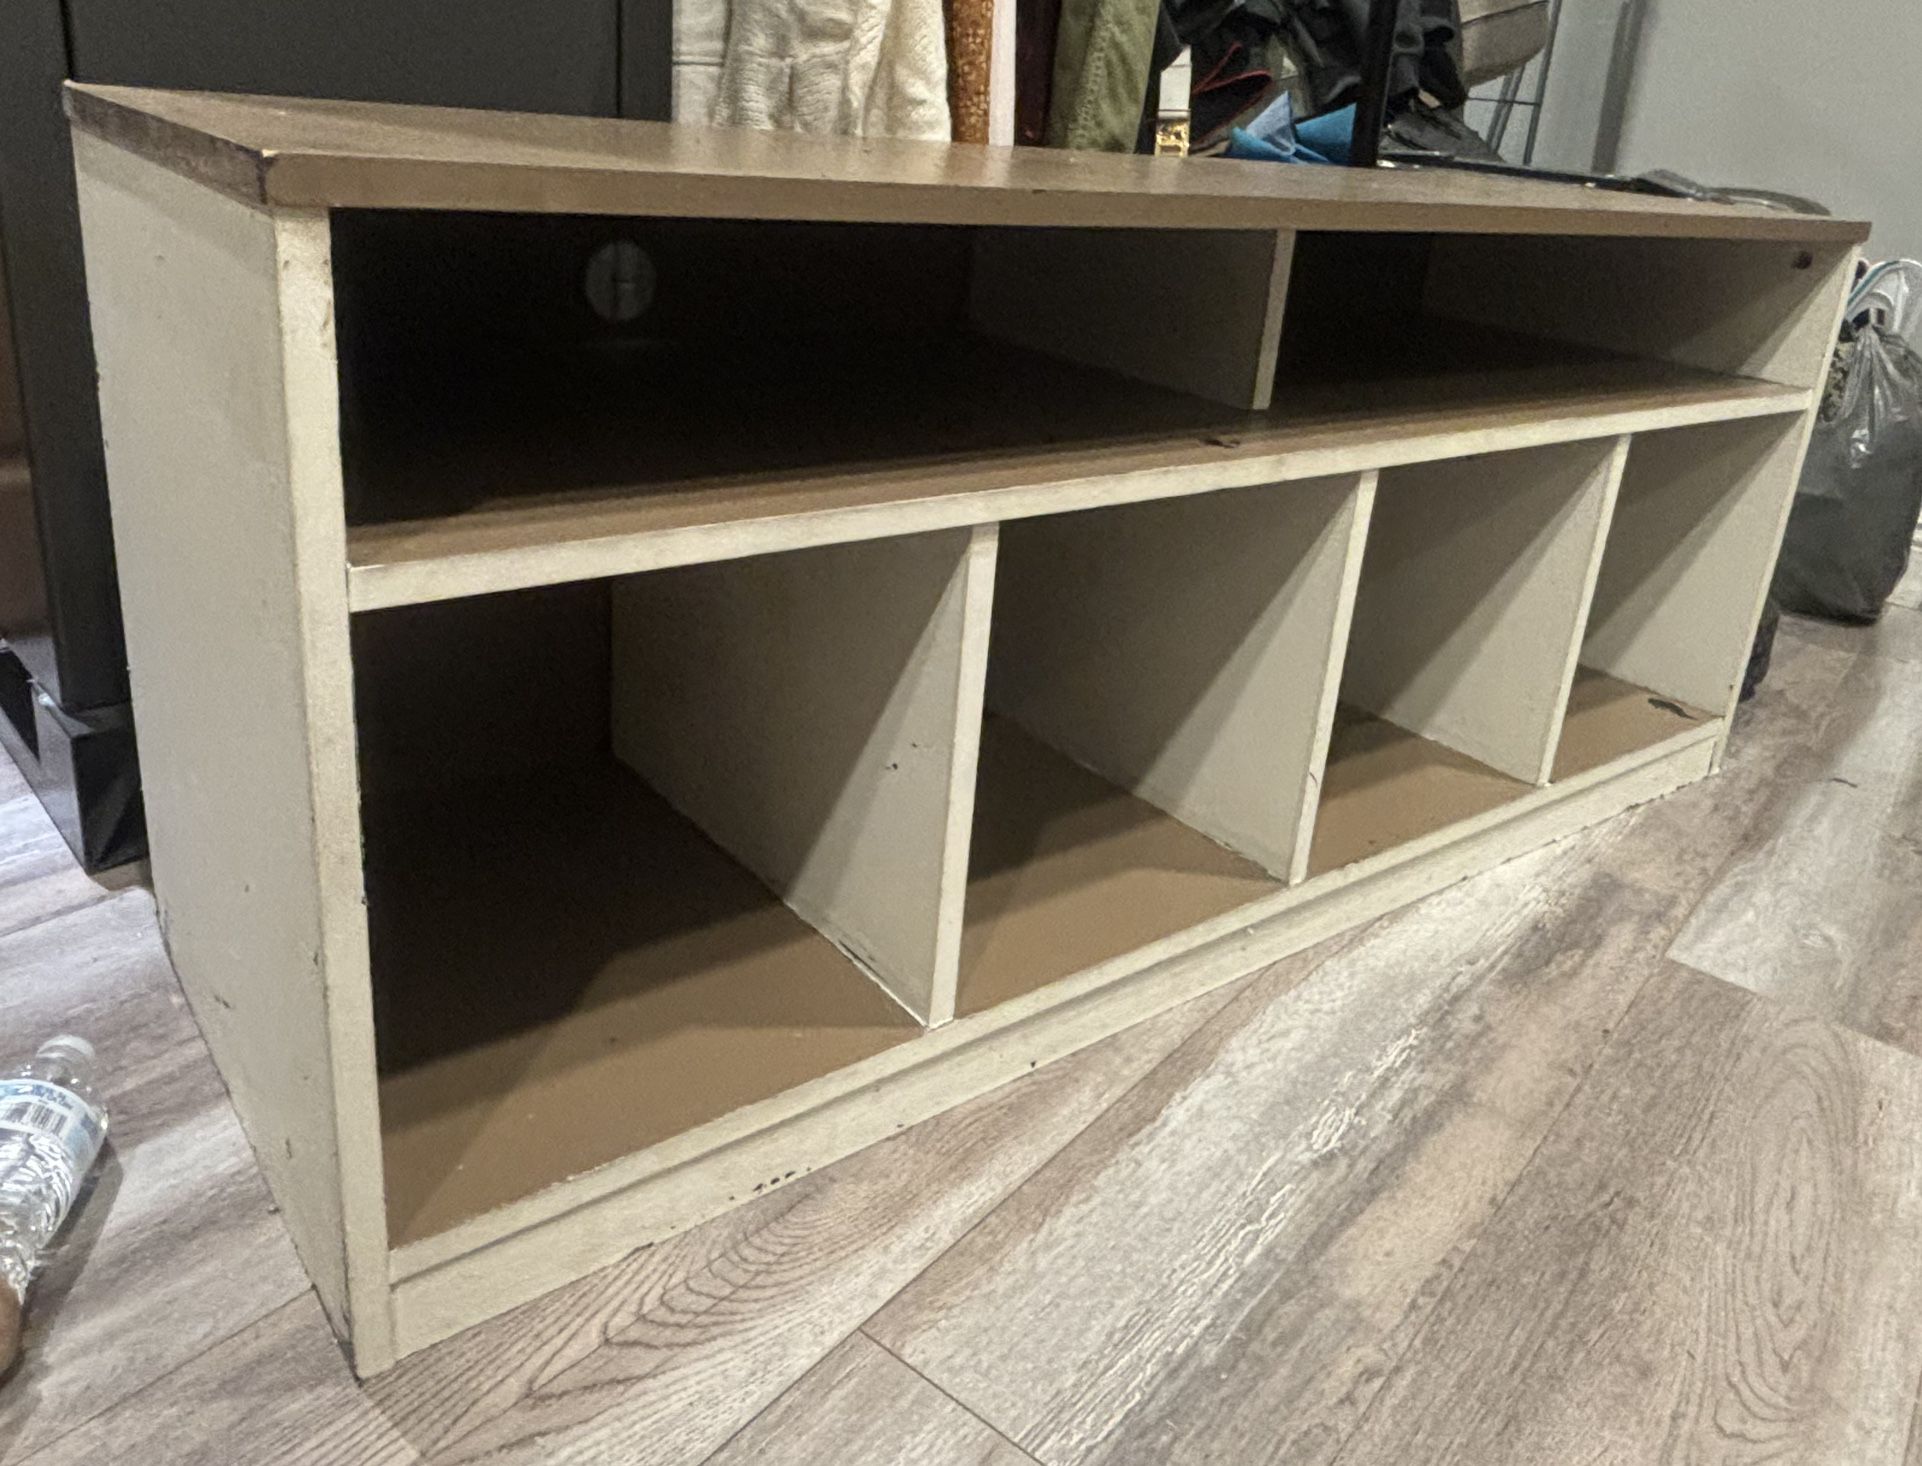 Entertainment System/ TV Stand